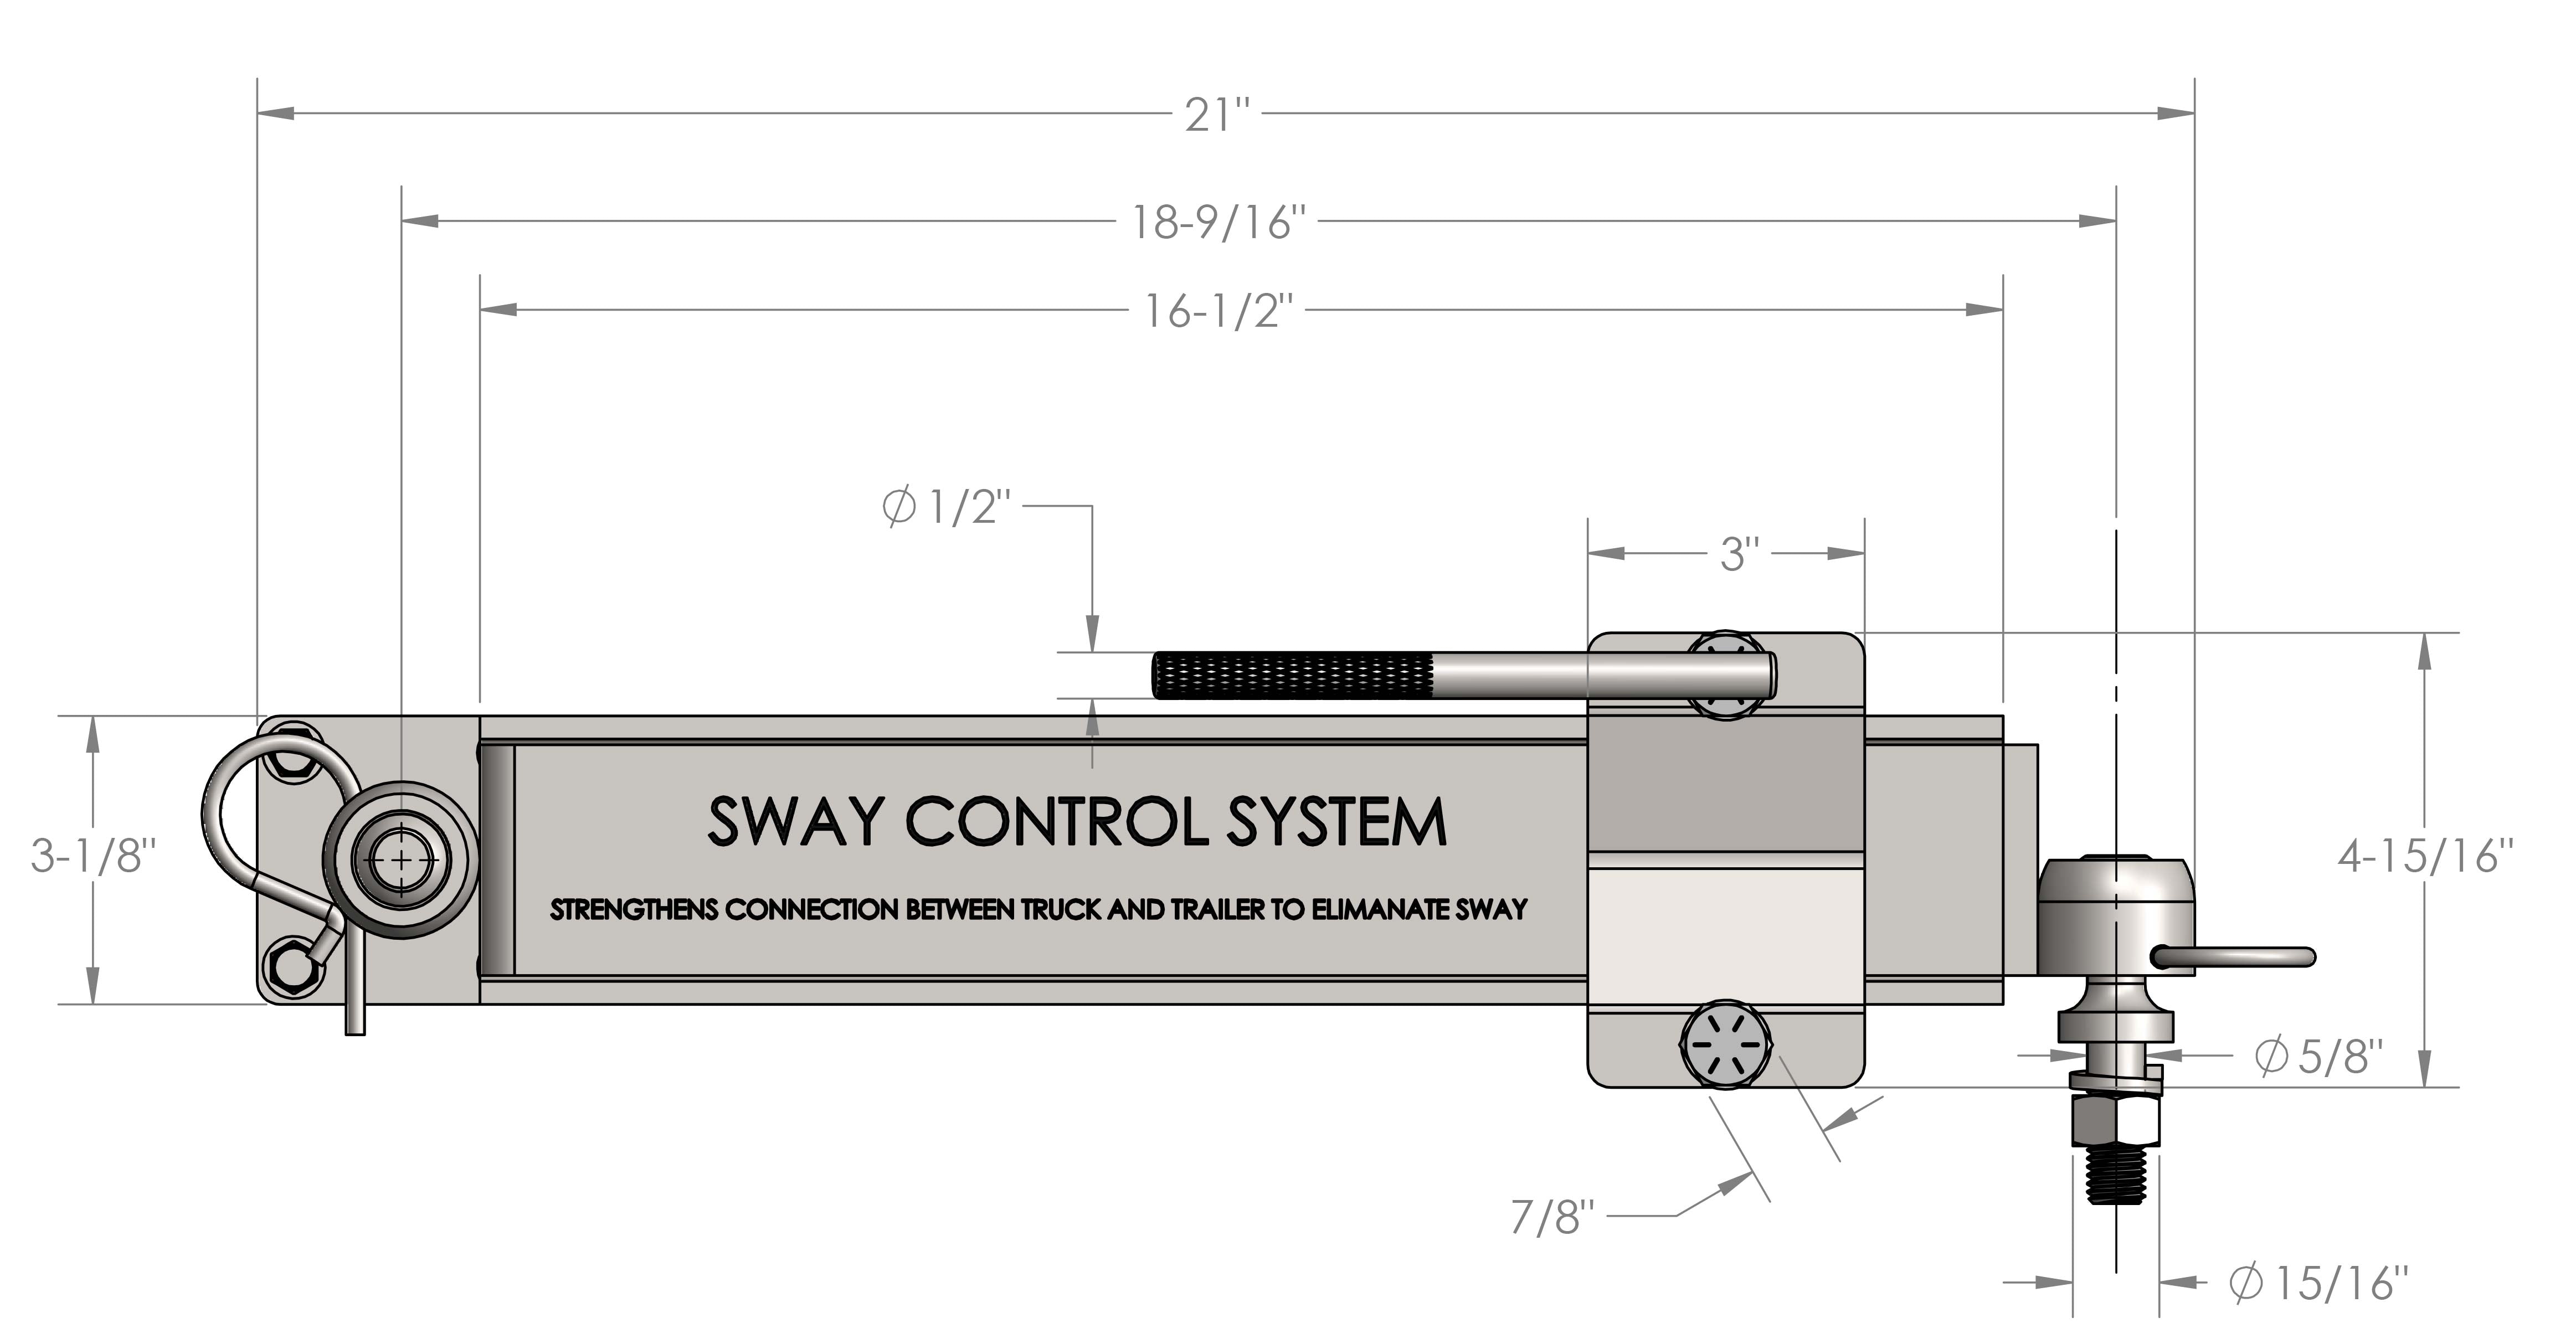 BulletProof Sway Control System Design Specification